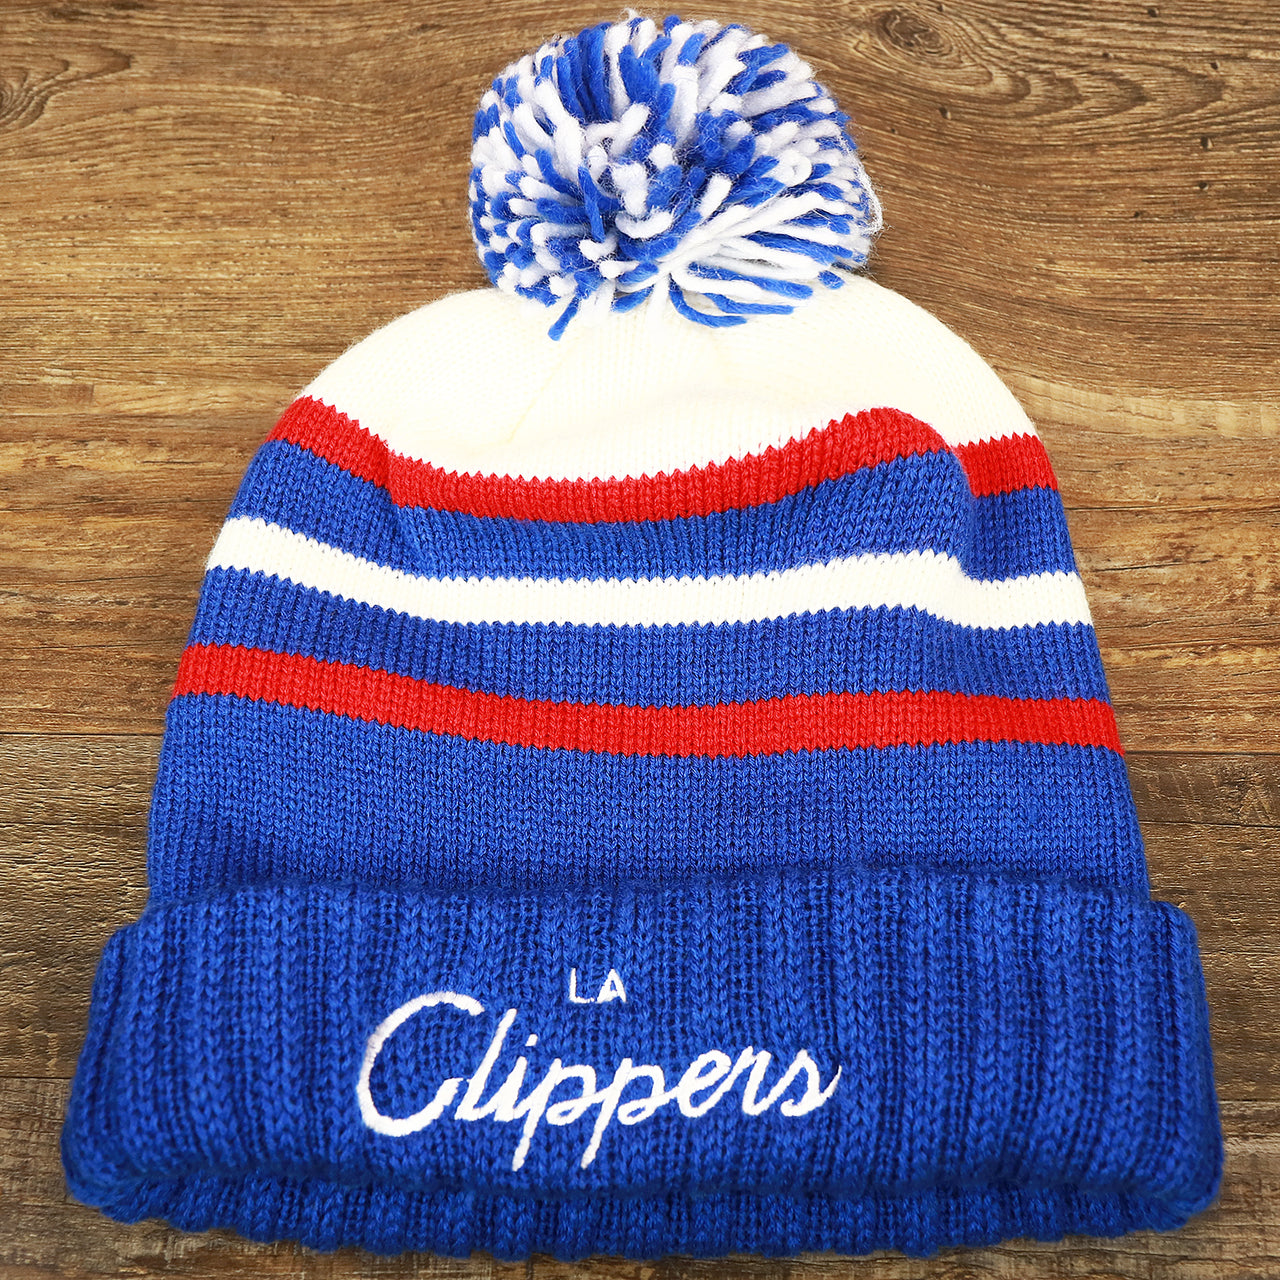 The front of the Los Angeles Clippers Cursive Wordmark Blue Cuff Pom Pom Winter Beanie | Blue Striped Winter Beanie